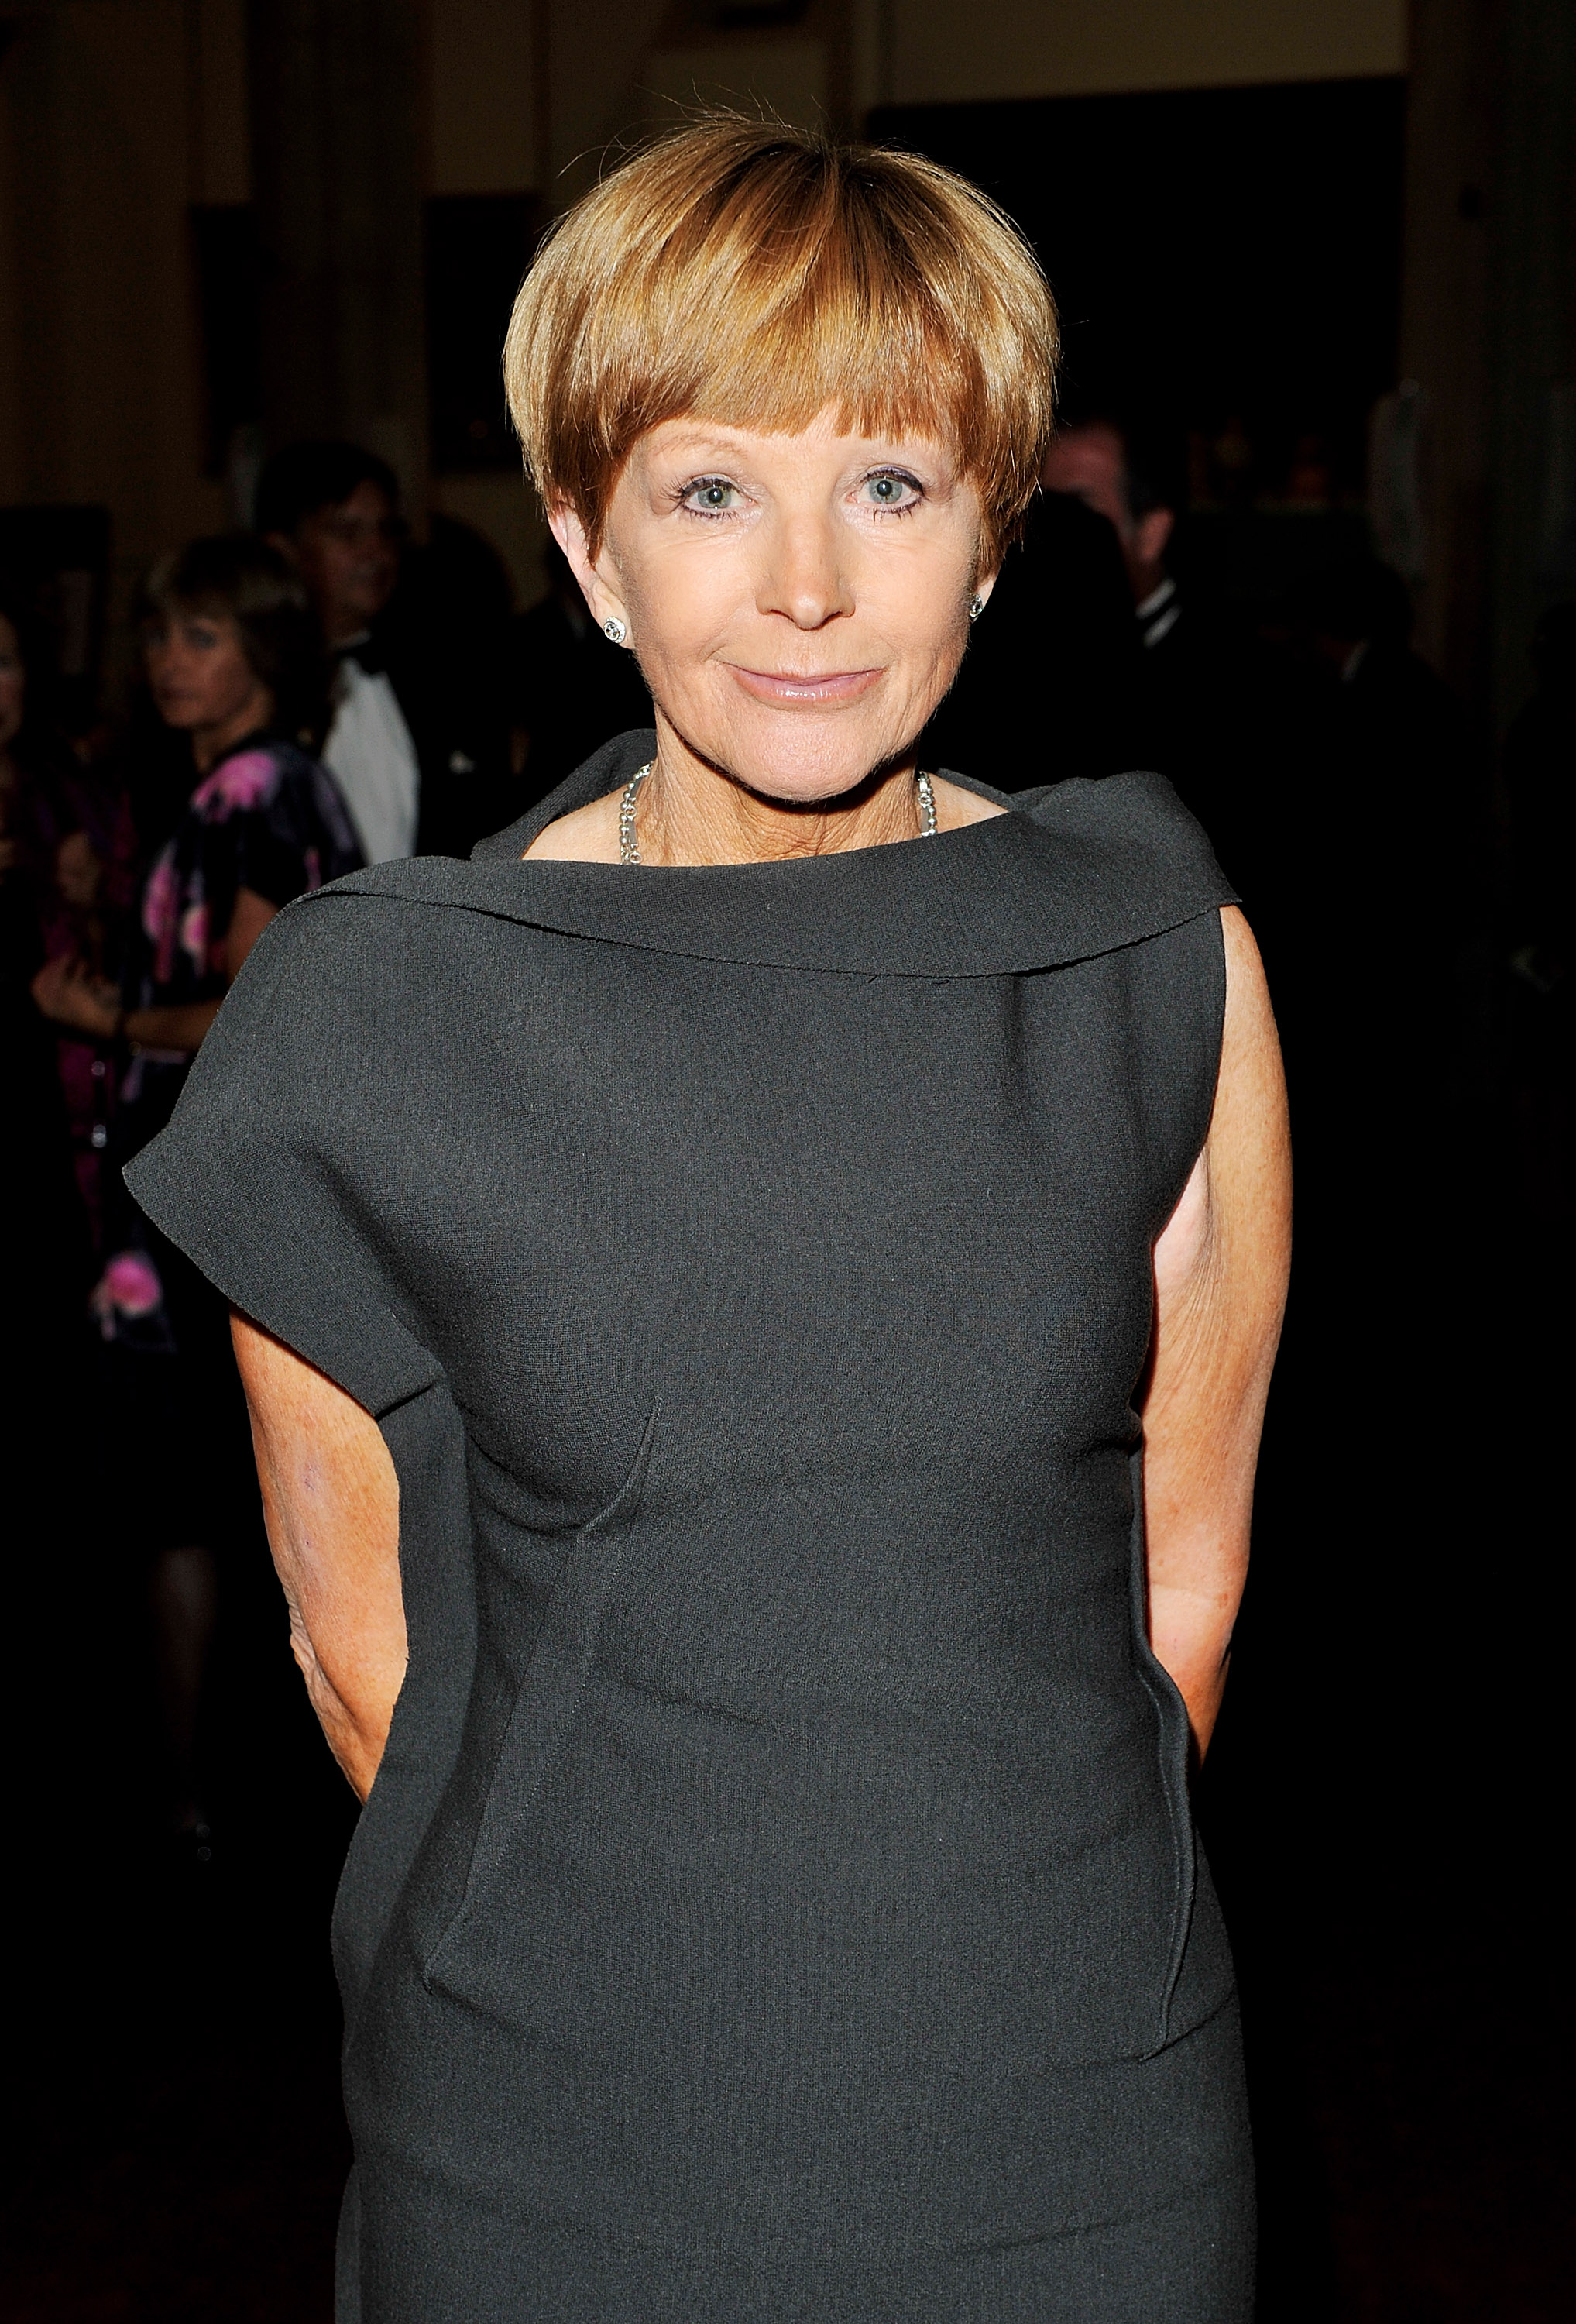 Anne Robinson attends a drinks reception at the Man Booker Prize Winner Ceremony in London, England, on October 16, 2012. | Source: Getty Images